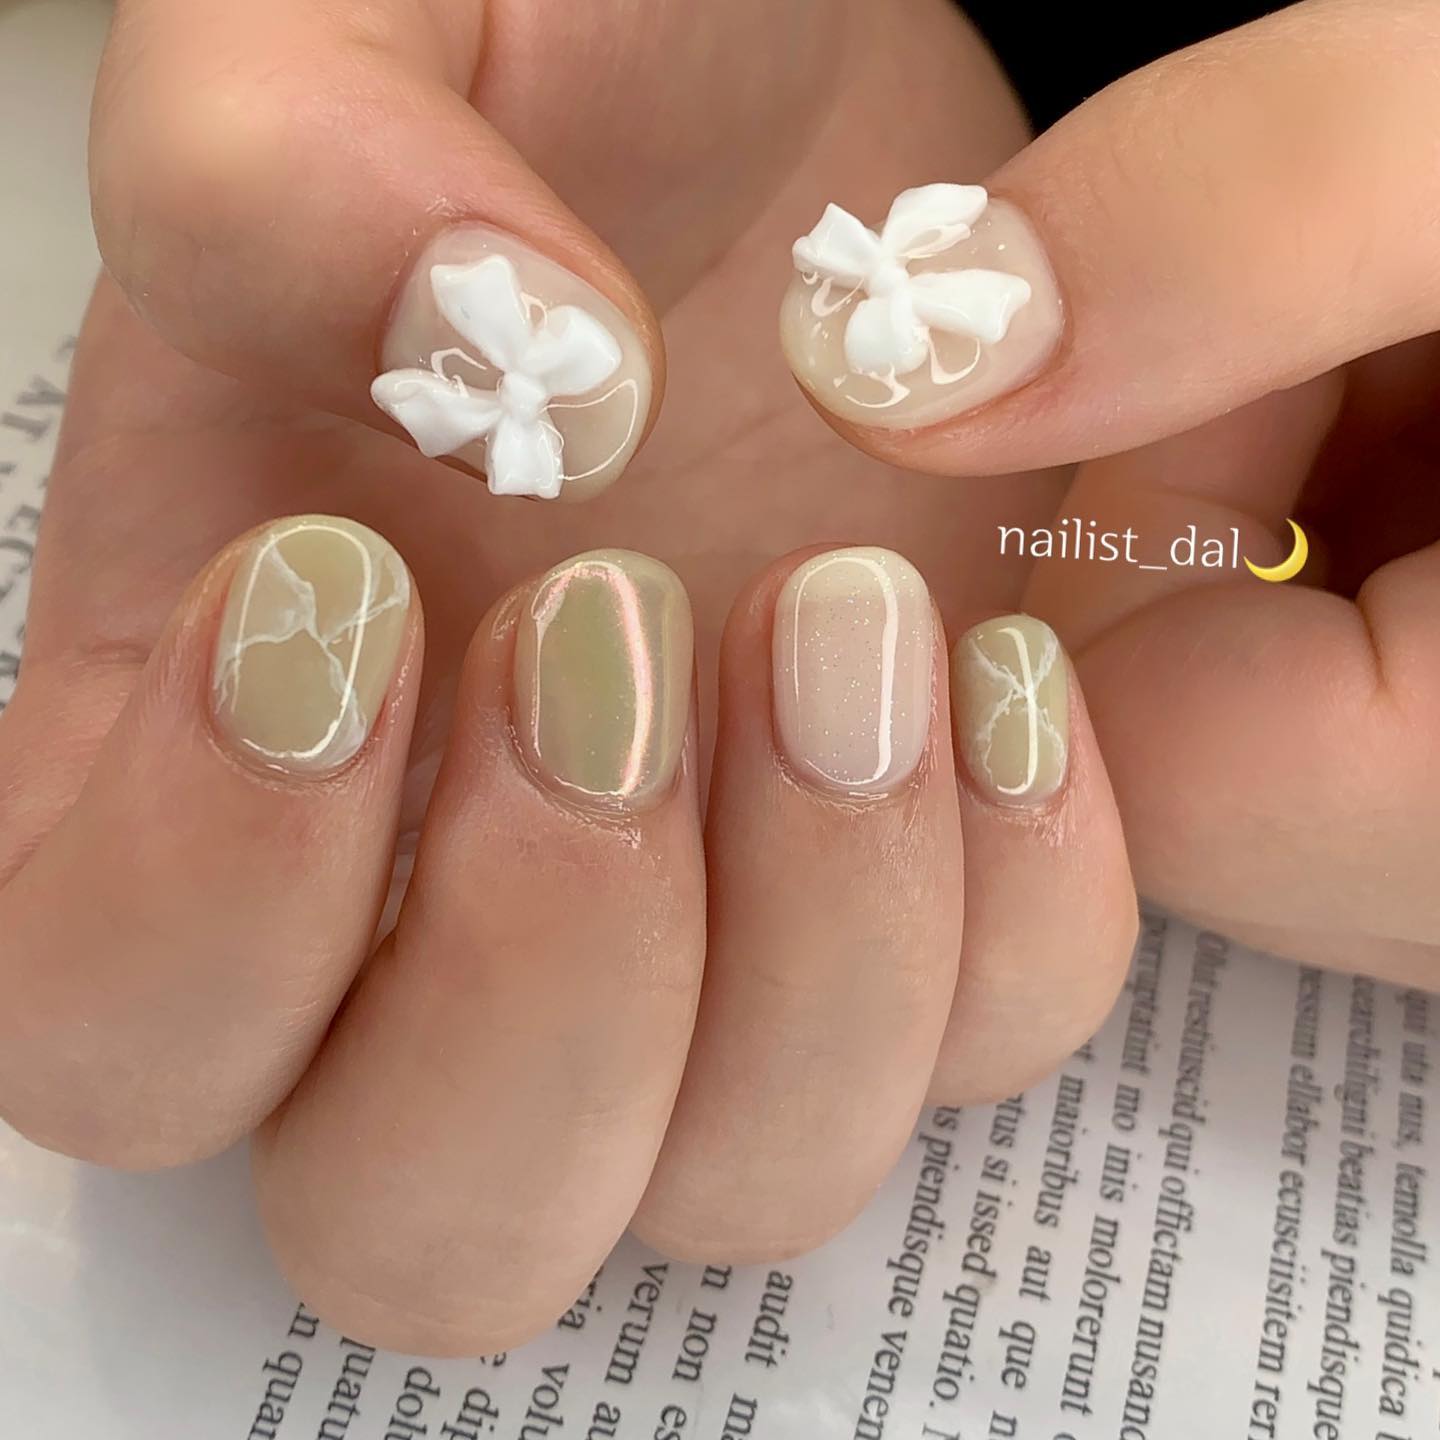 Not all wedding nails should be white, so you can combine nude nail polish with a light green one. Your short nails will look more amazing if you add cute ribbons on your thumbs. They will symbolize your cuteness as a bride.